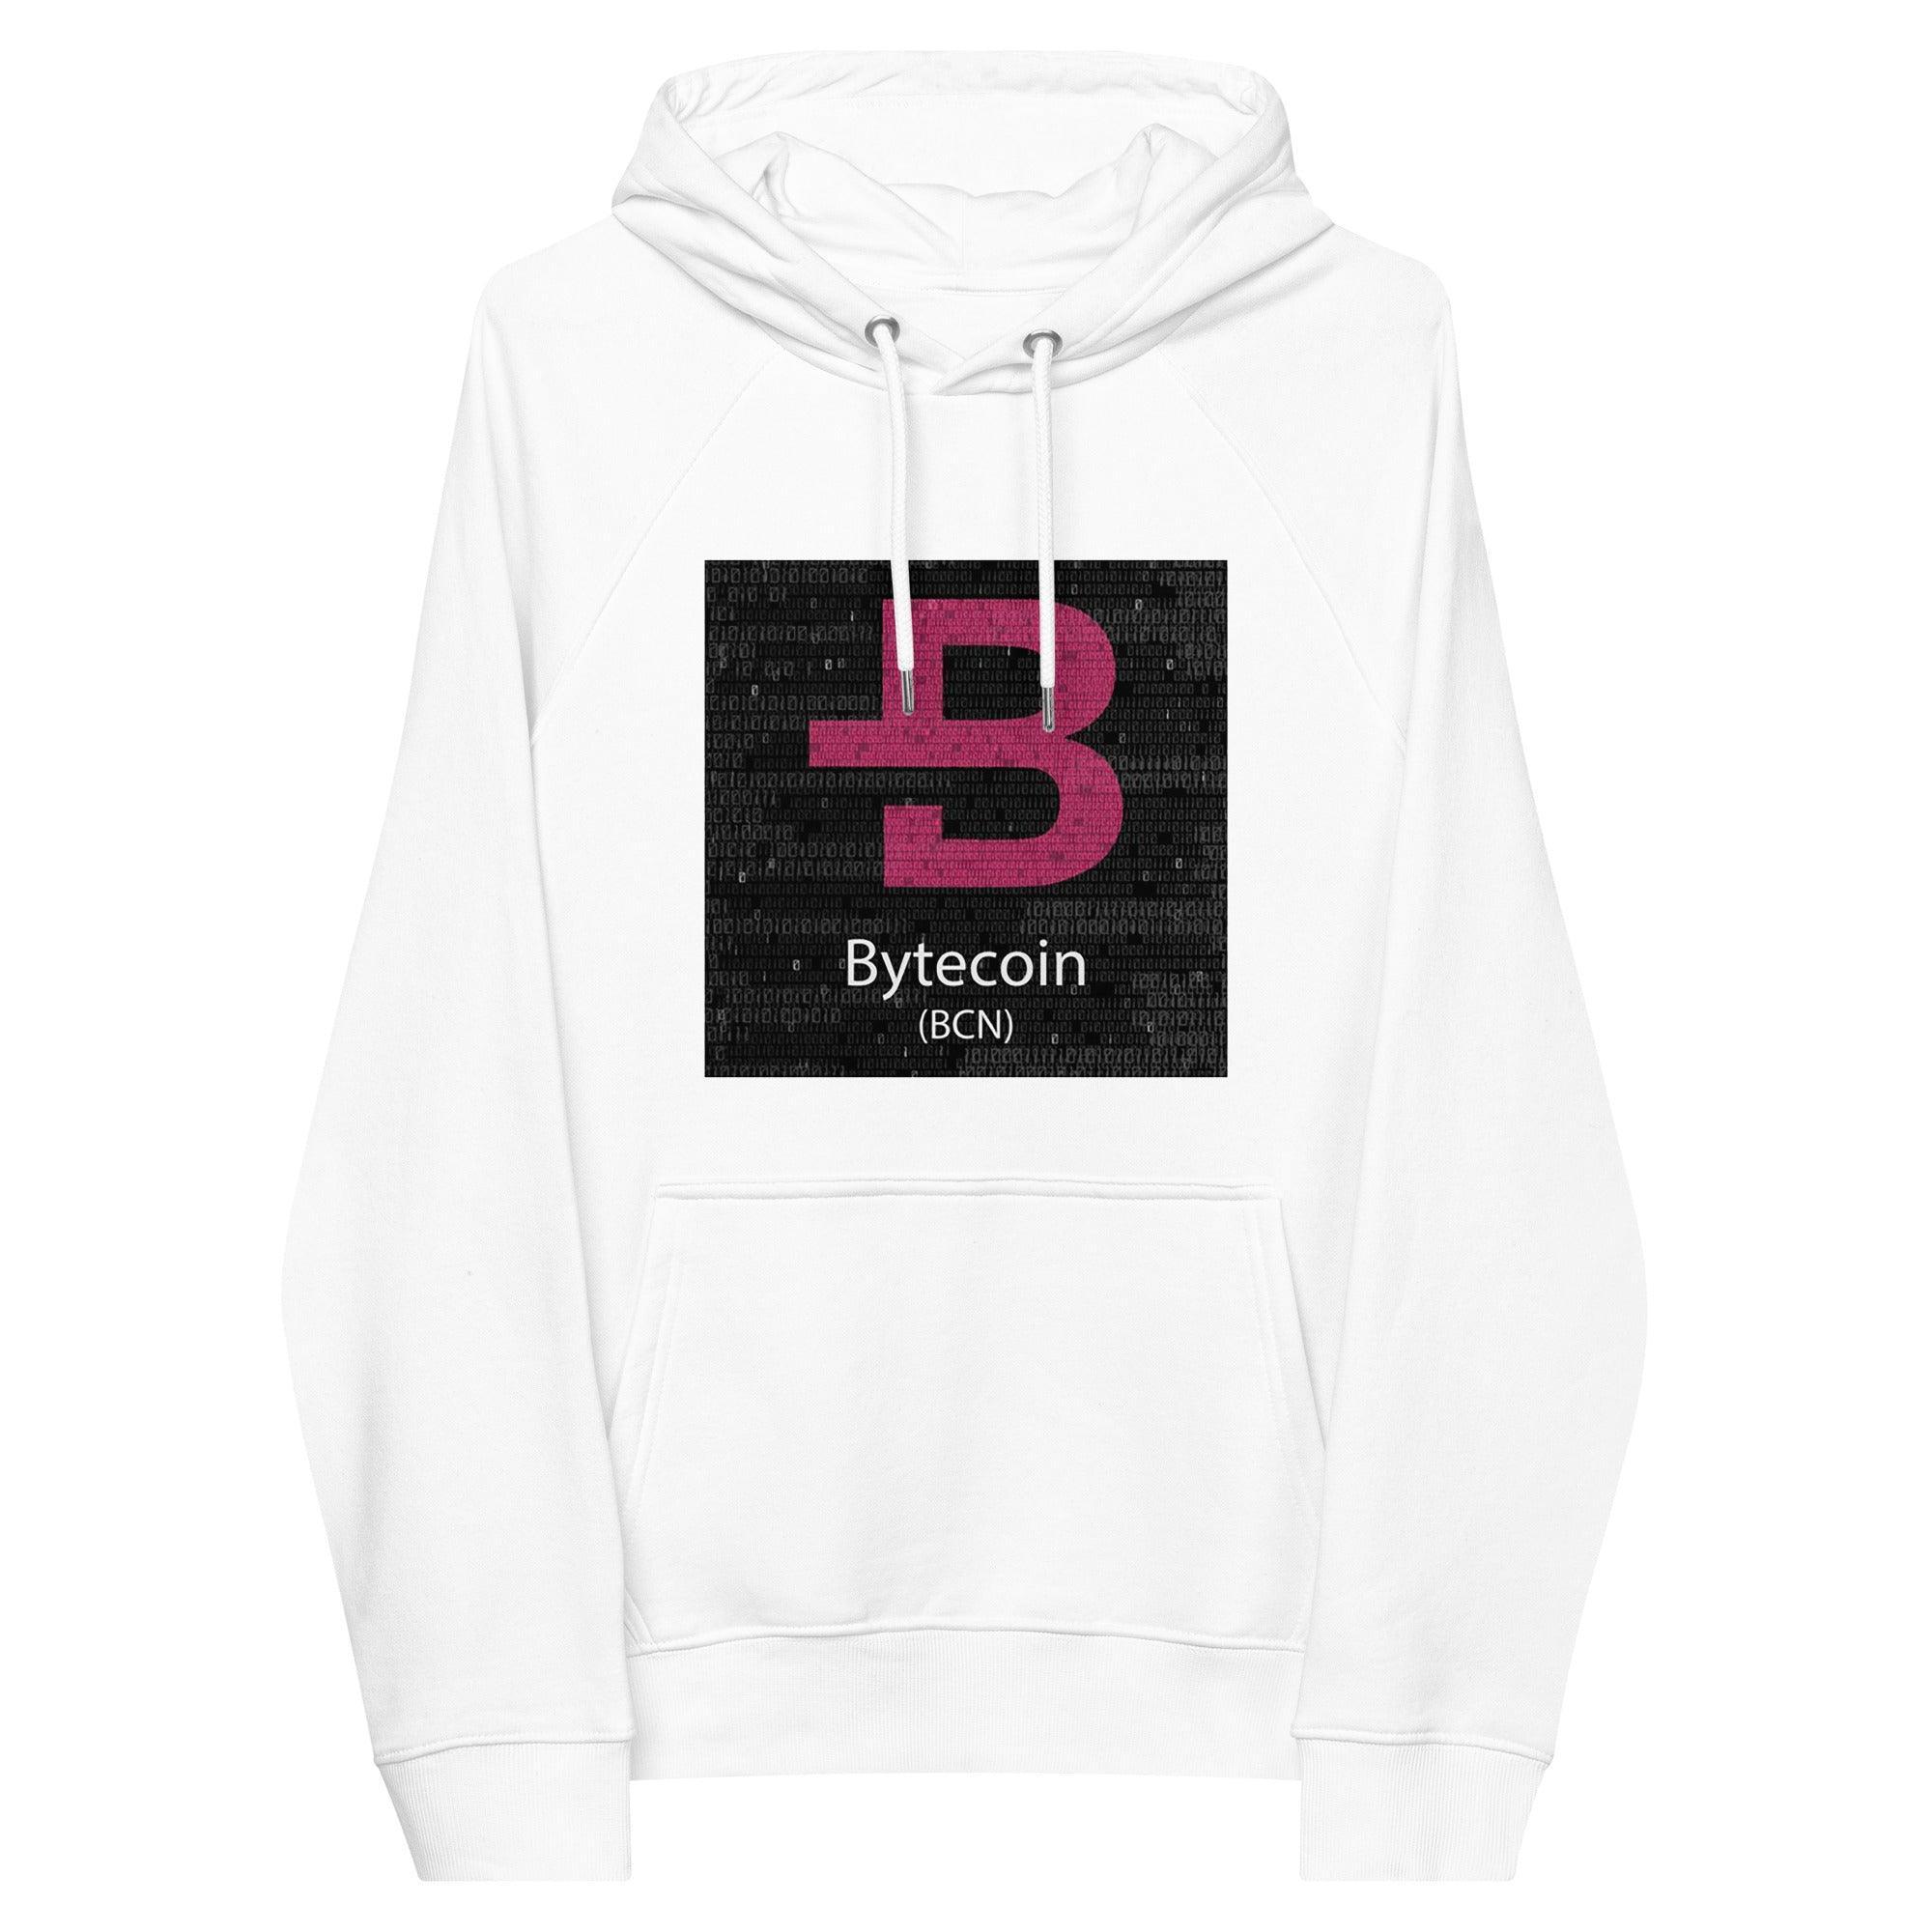 Bytecoin | BCN Pullover Hoodie - InvestmenTees